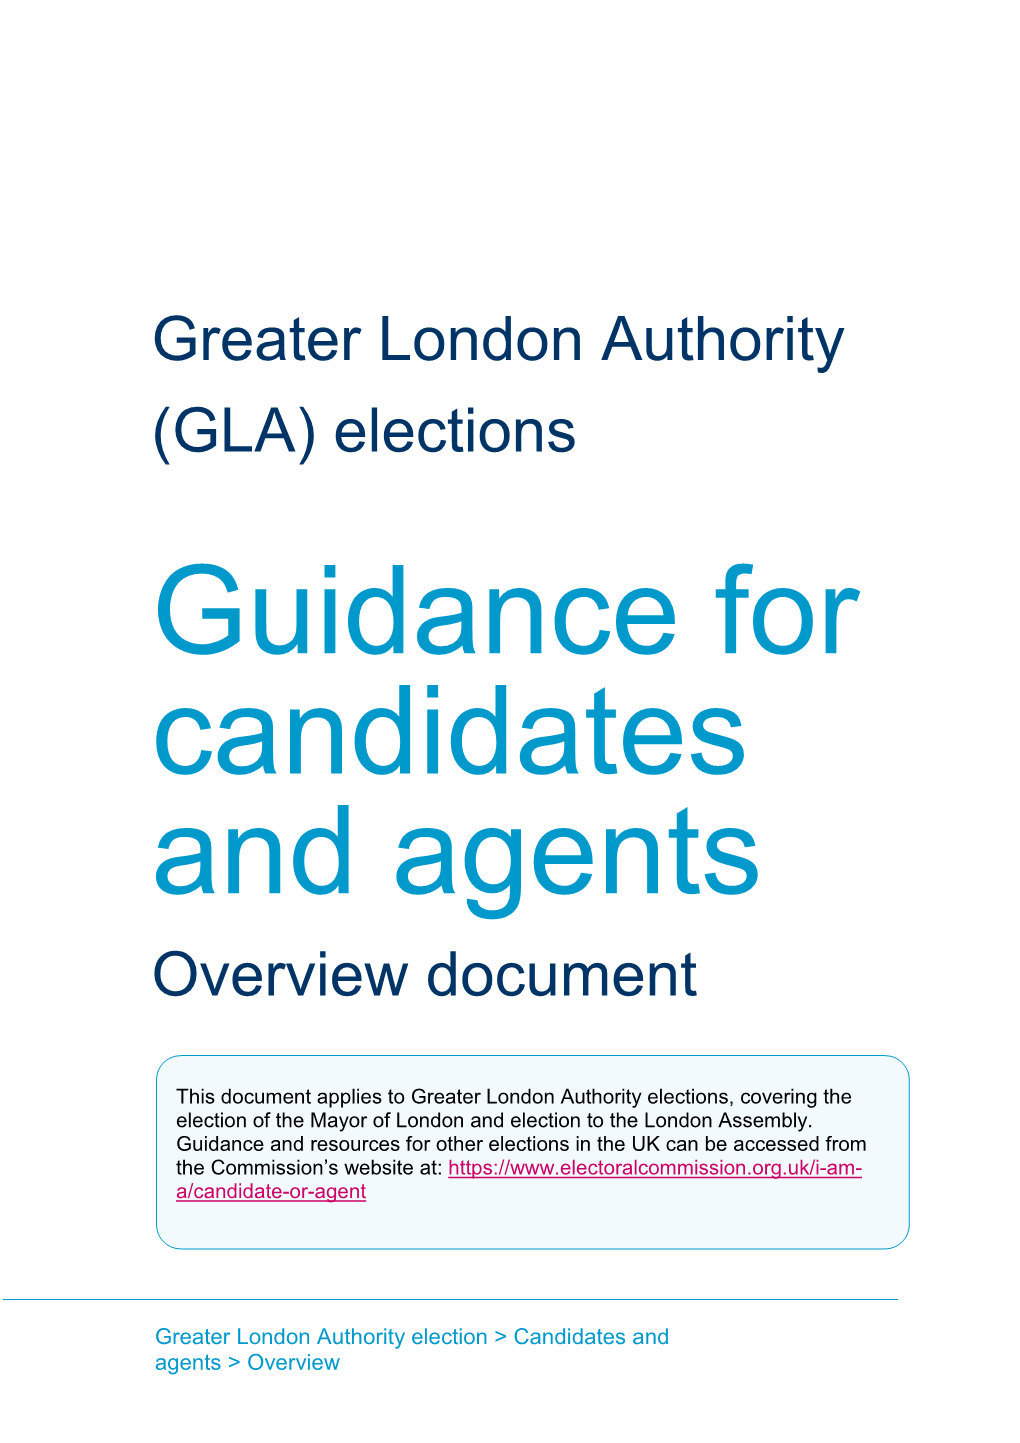 Greater London Authority Elections, Covering the Election of the Mayor of London and Election to the London Assembly